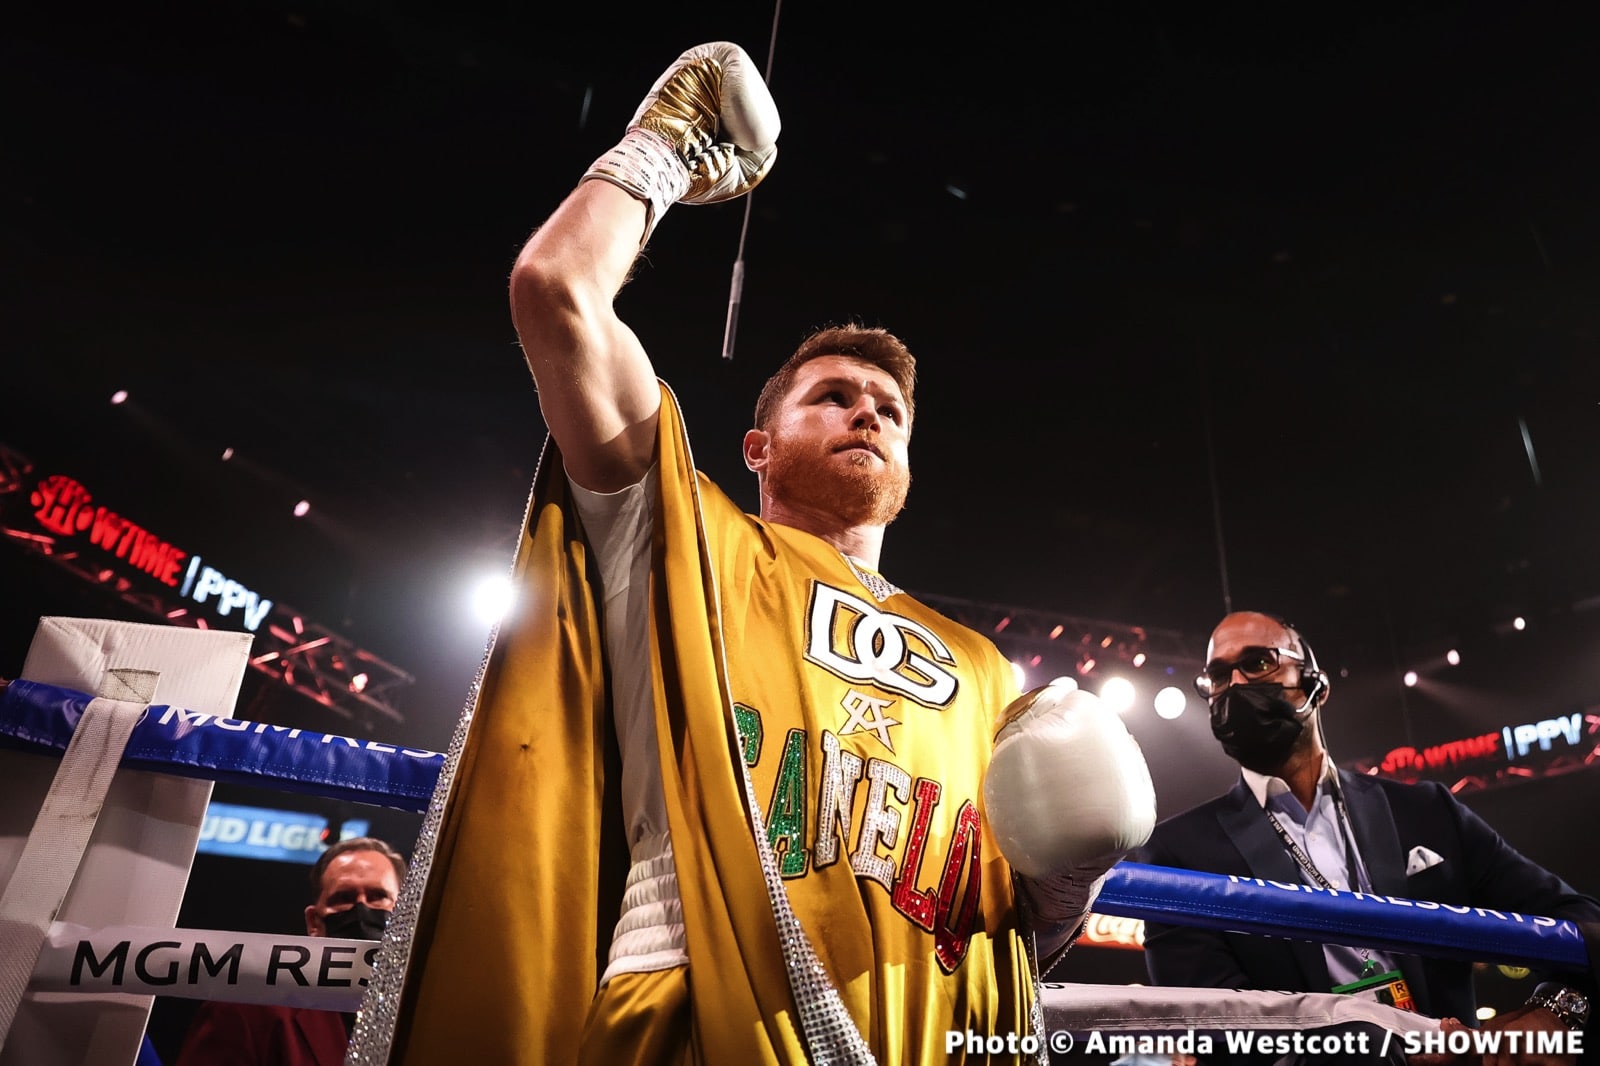 Canelo Alvarez vs. Ilunga Makabu: Does anyone want to watch this on May 7th?